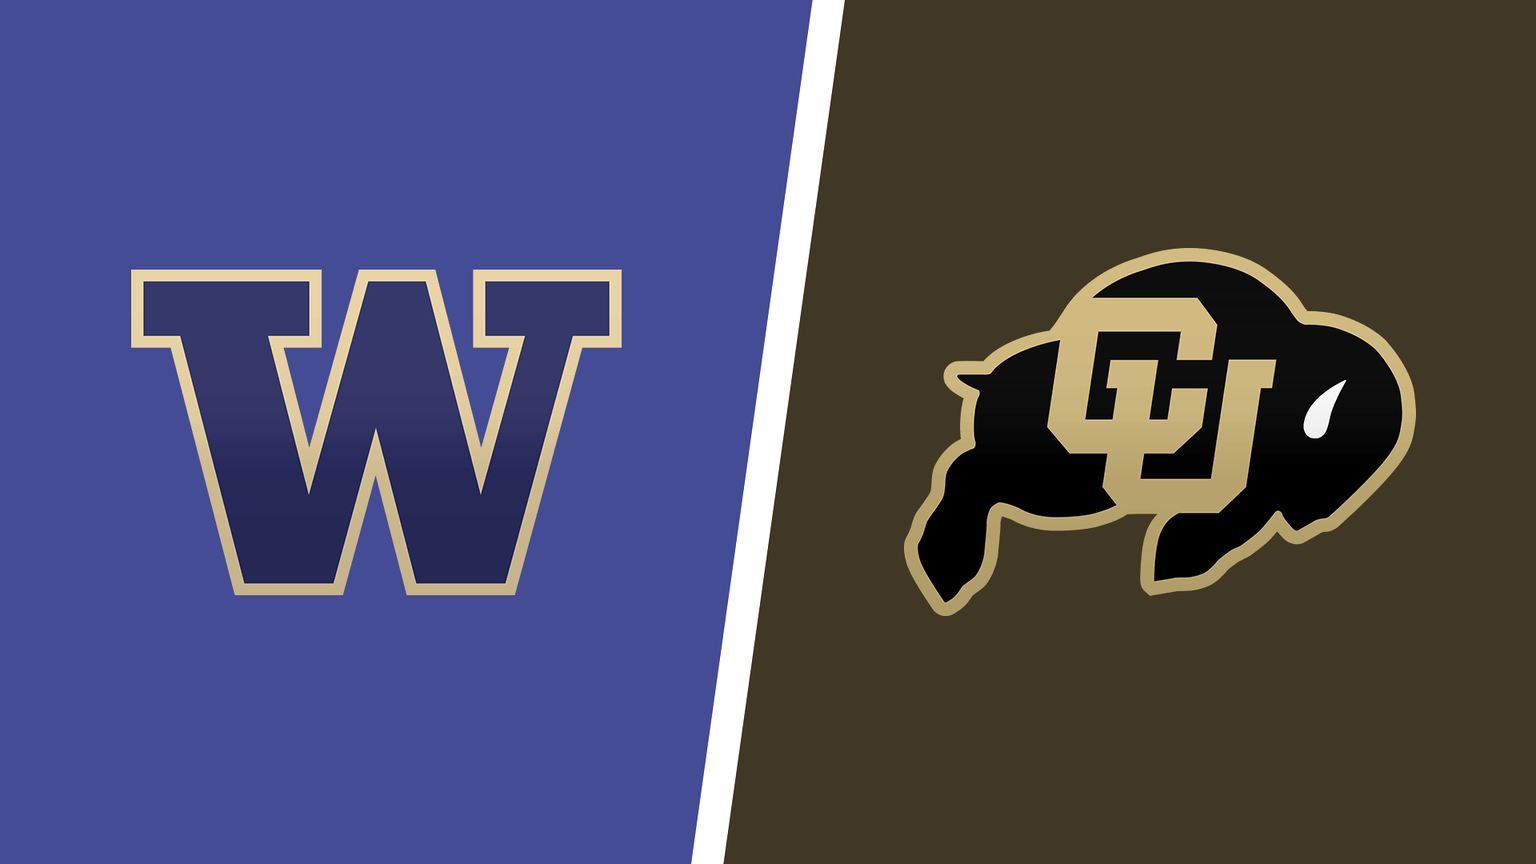 How to Watch Colorado vs. Washington Game Live Online on November 19